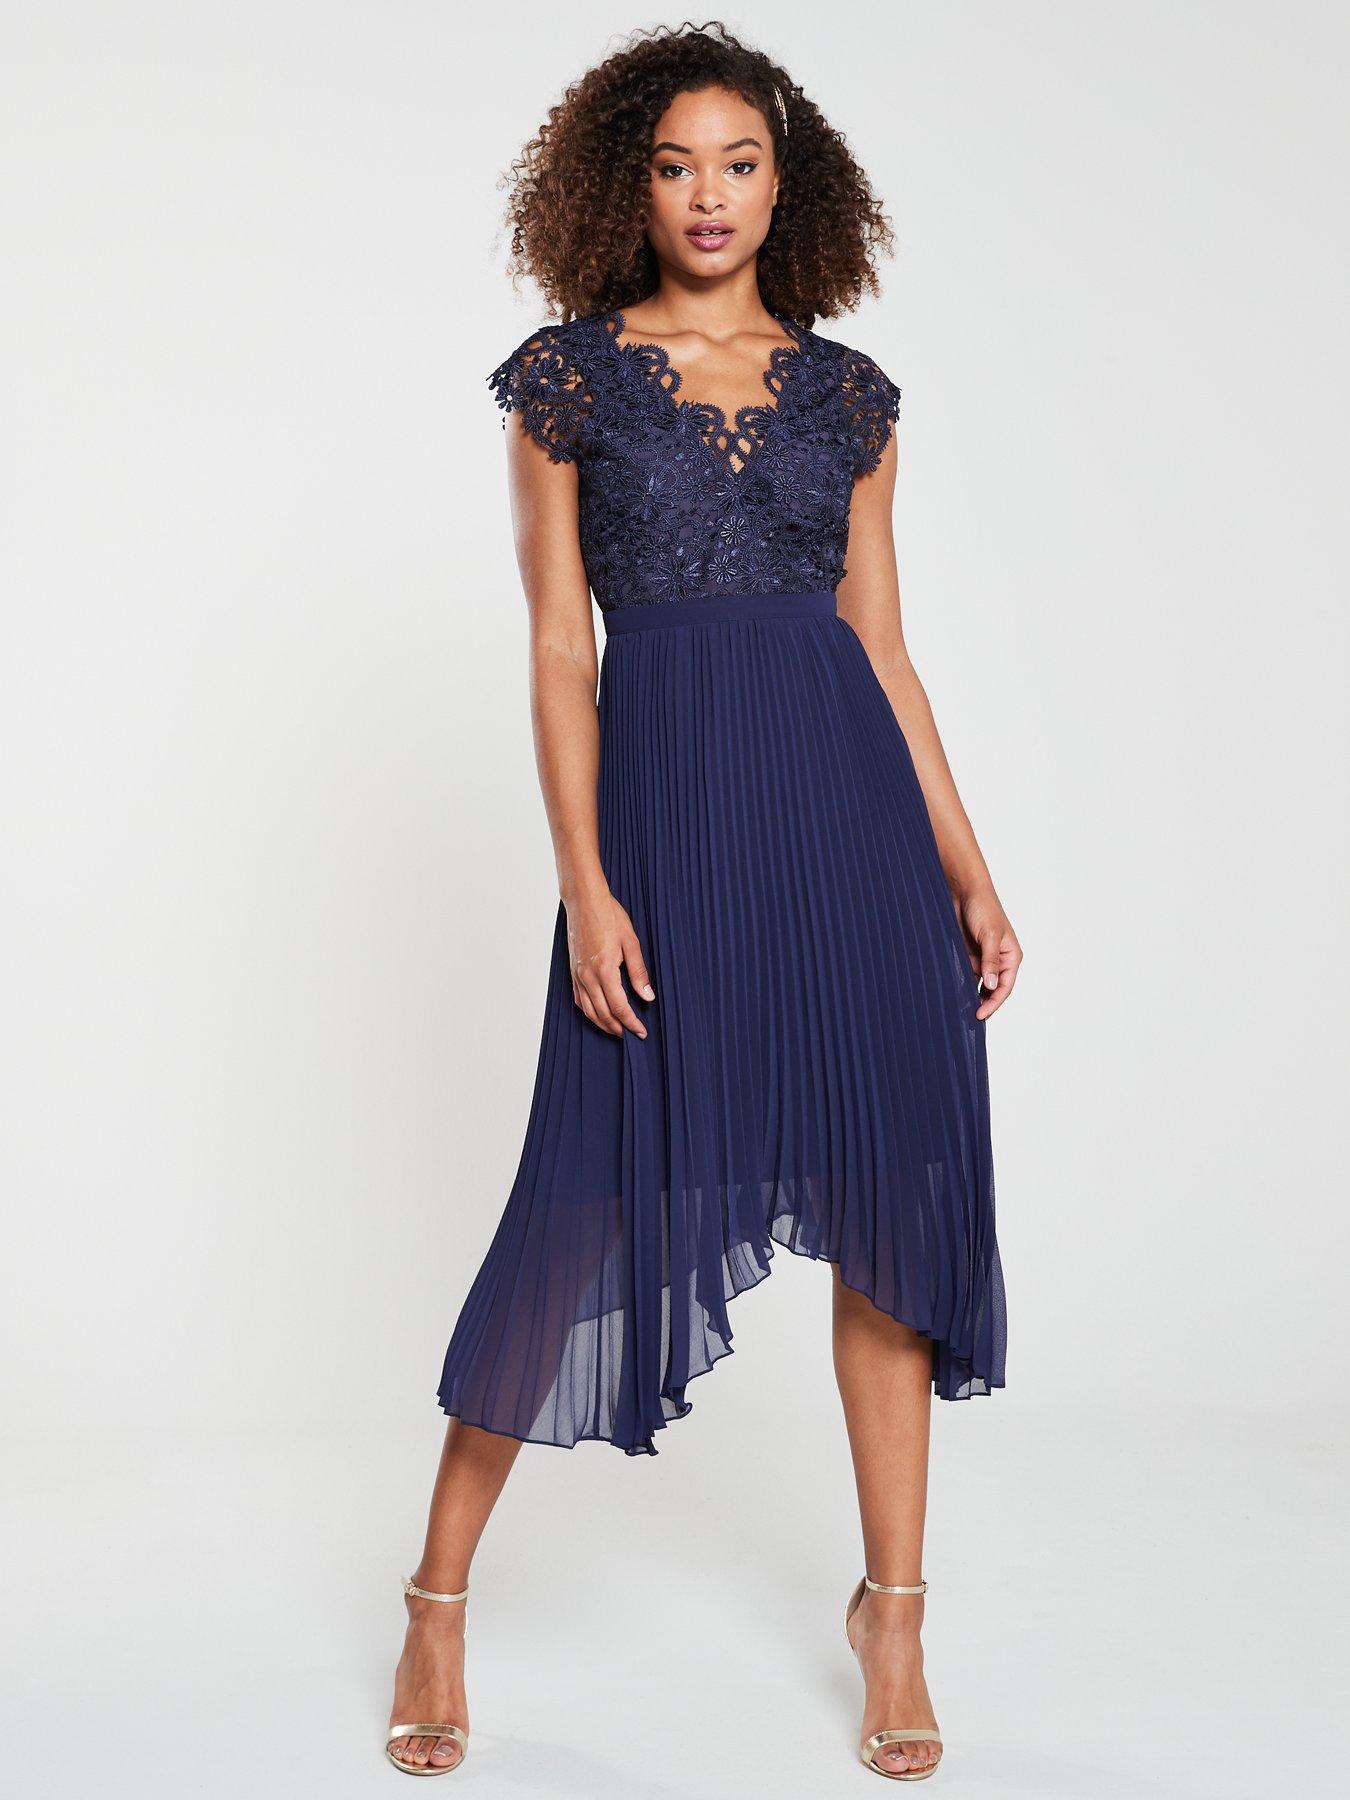 where to buy occasion dresses uk